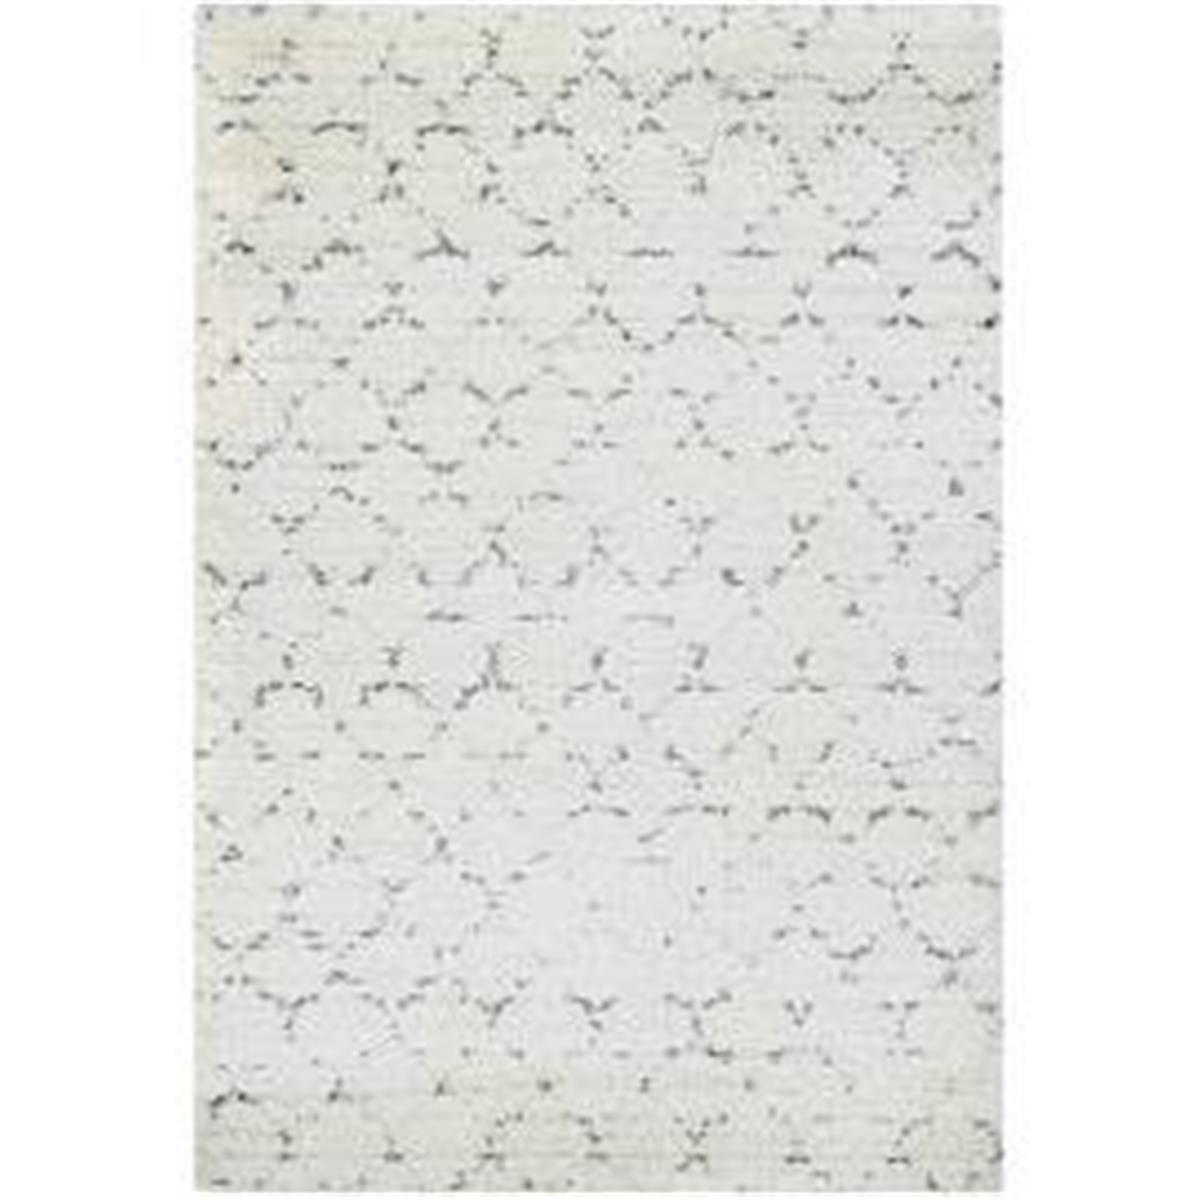 43160336092129t 9 Ft. 2 In. X 12 Ft. 9 In. Bromley Davos Rug, Snow & Brown